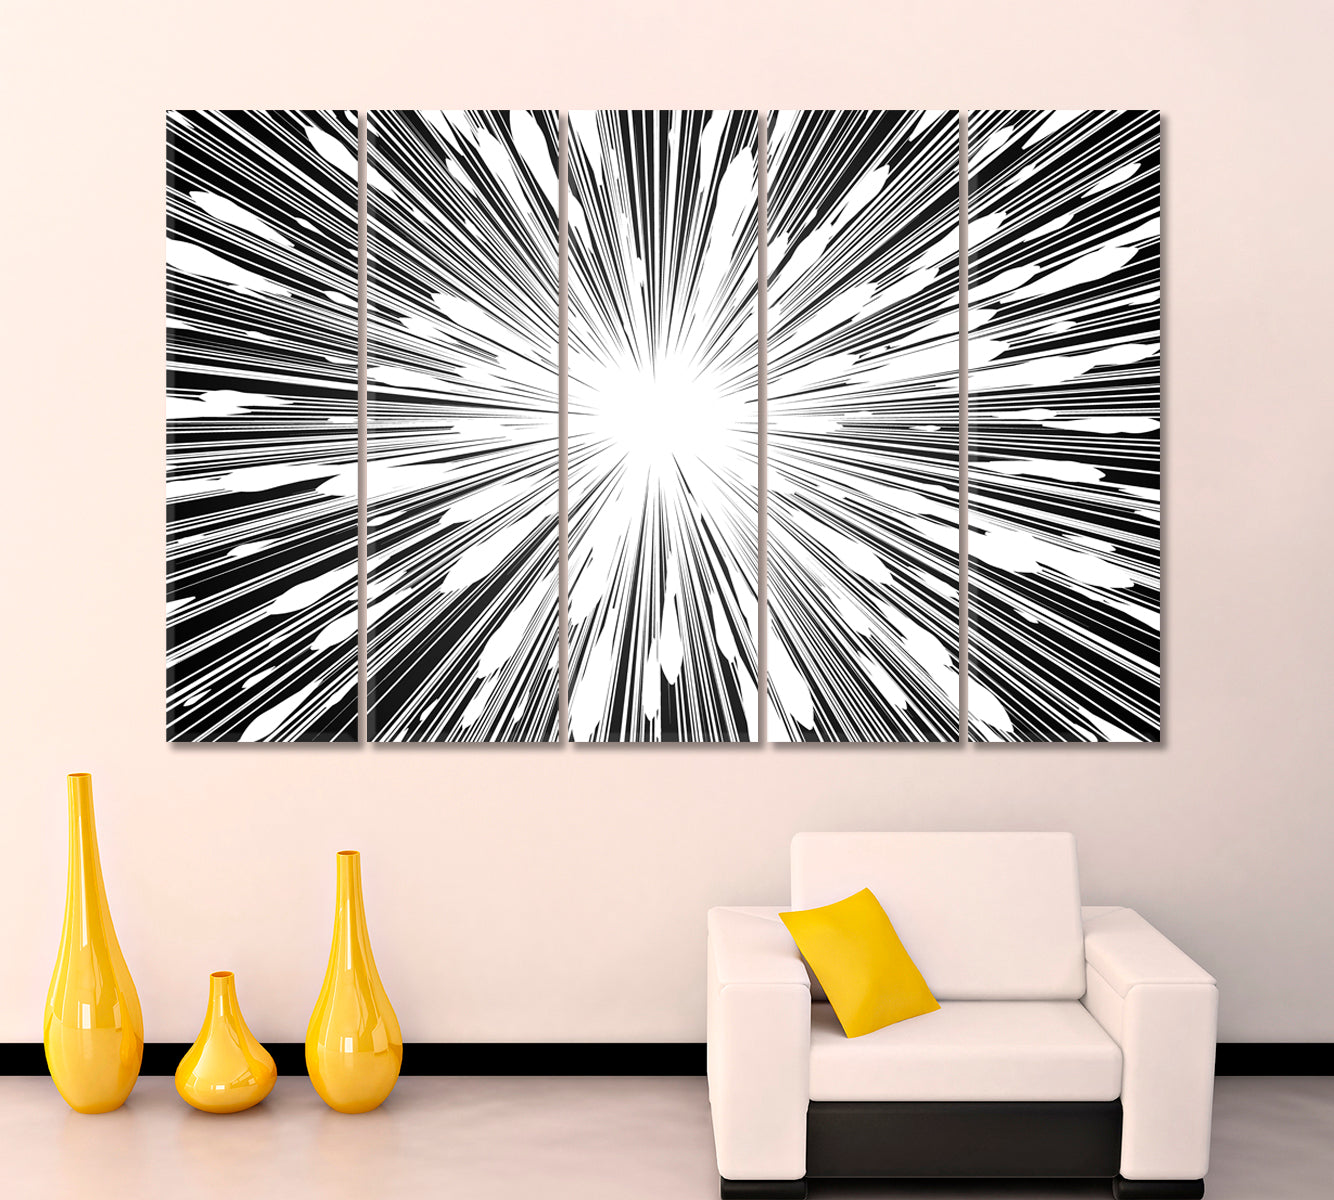 LIGHT RAYS Abstract Black and White Radial Lines Explosion Sun Ray Starburst Canvas Print Abstract Art Print Artesty 5 panels 36" x 24" 